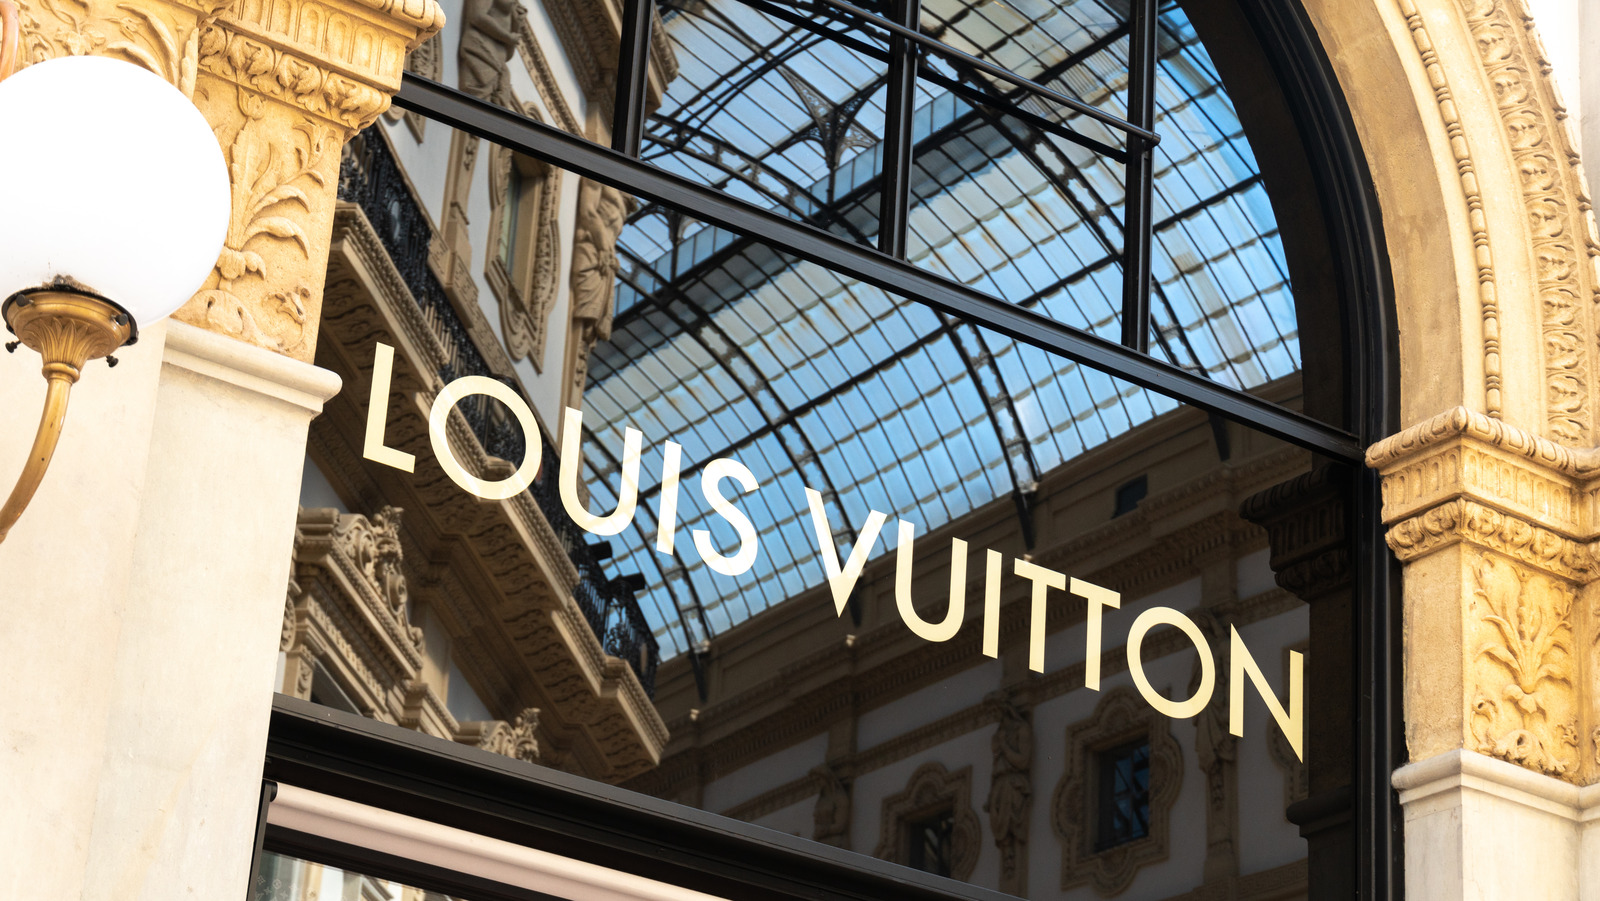 A Louis Vuitton store in China allegedly sold a fake handbag to a customer  - Luxurylaunches